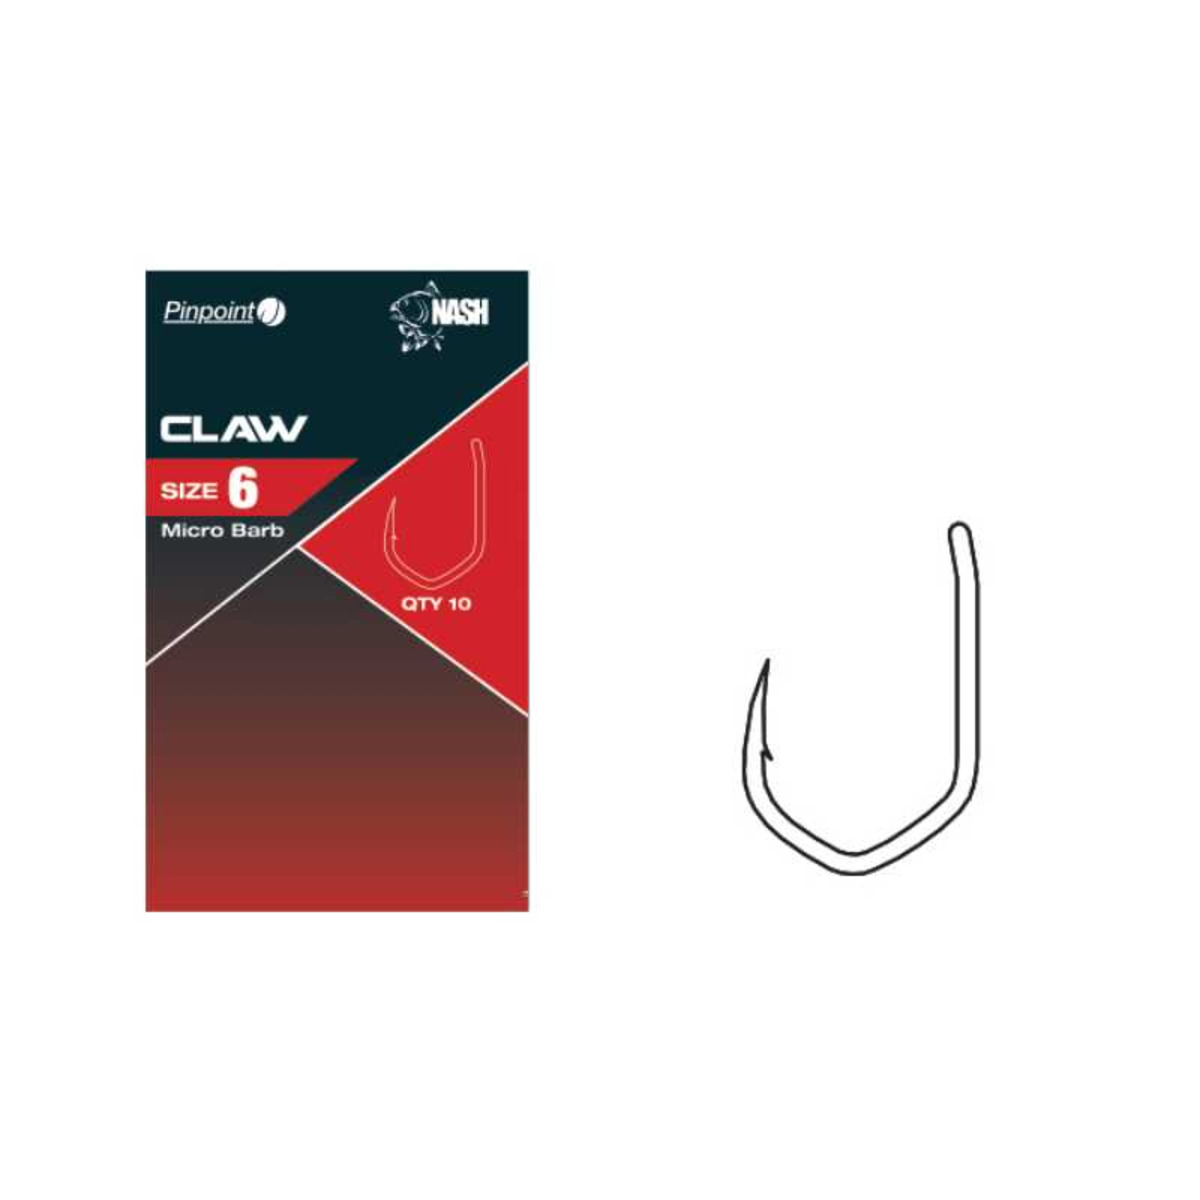 Nash Claw - Size 6 Micro Barbed